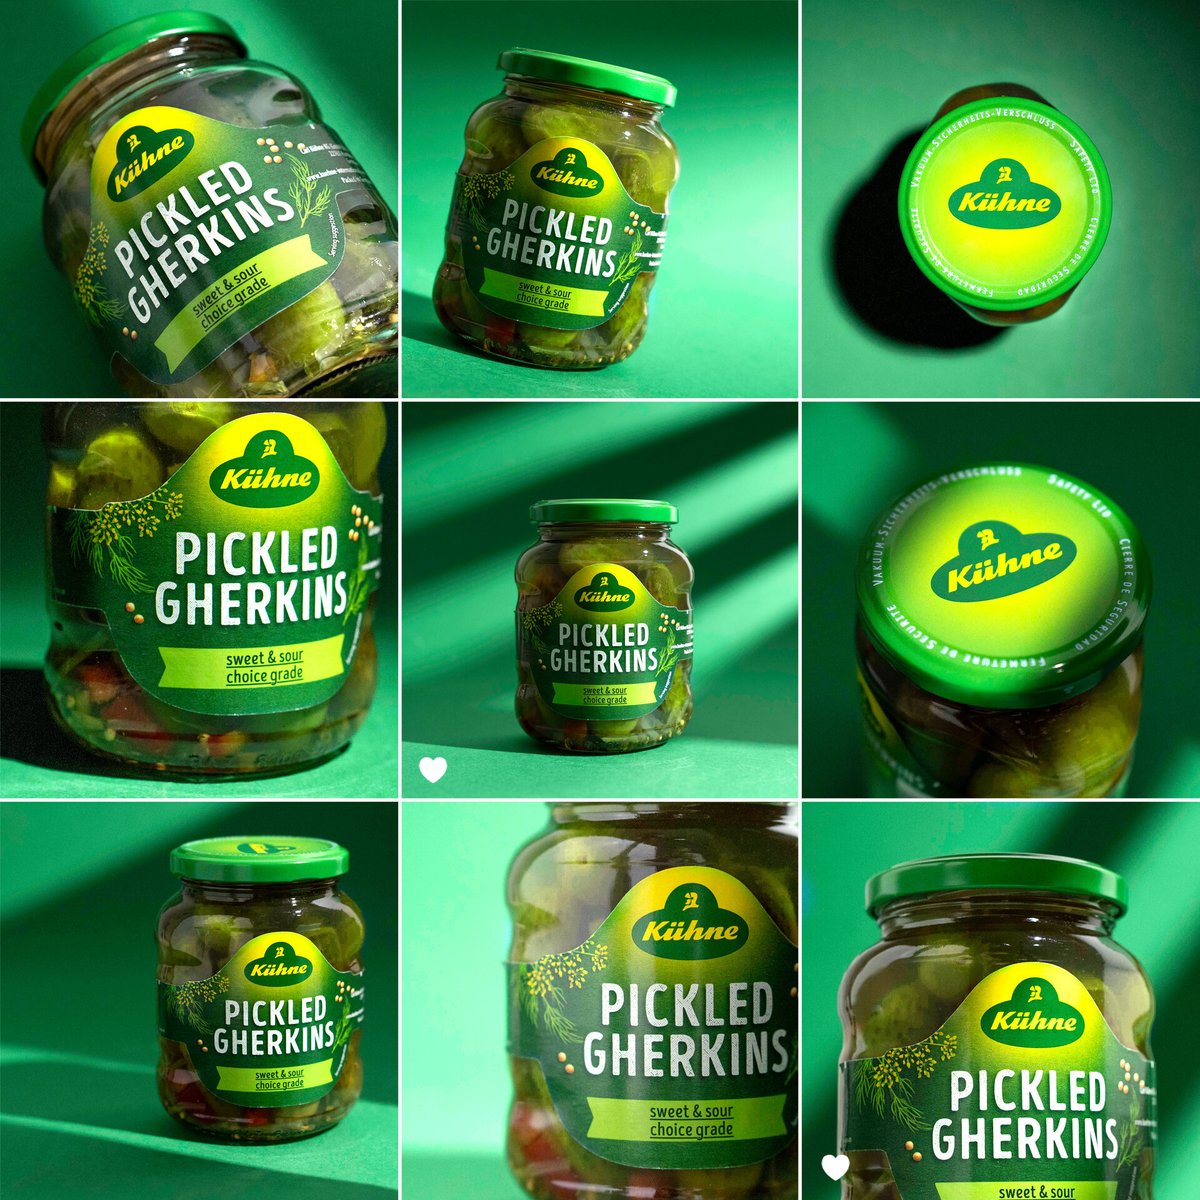 How can you tell which is our good side? THEY ALL LOOK GOOD. Our camera roll is looking tasty 👀 #pickle #gherkins #foodlover